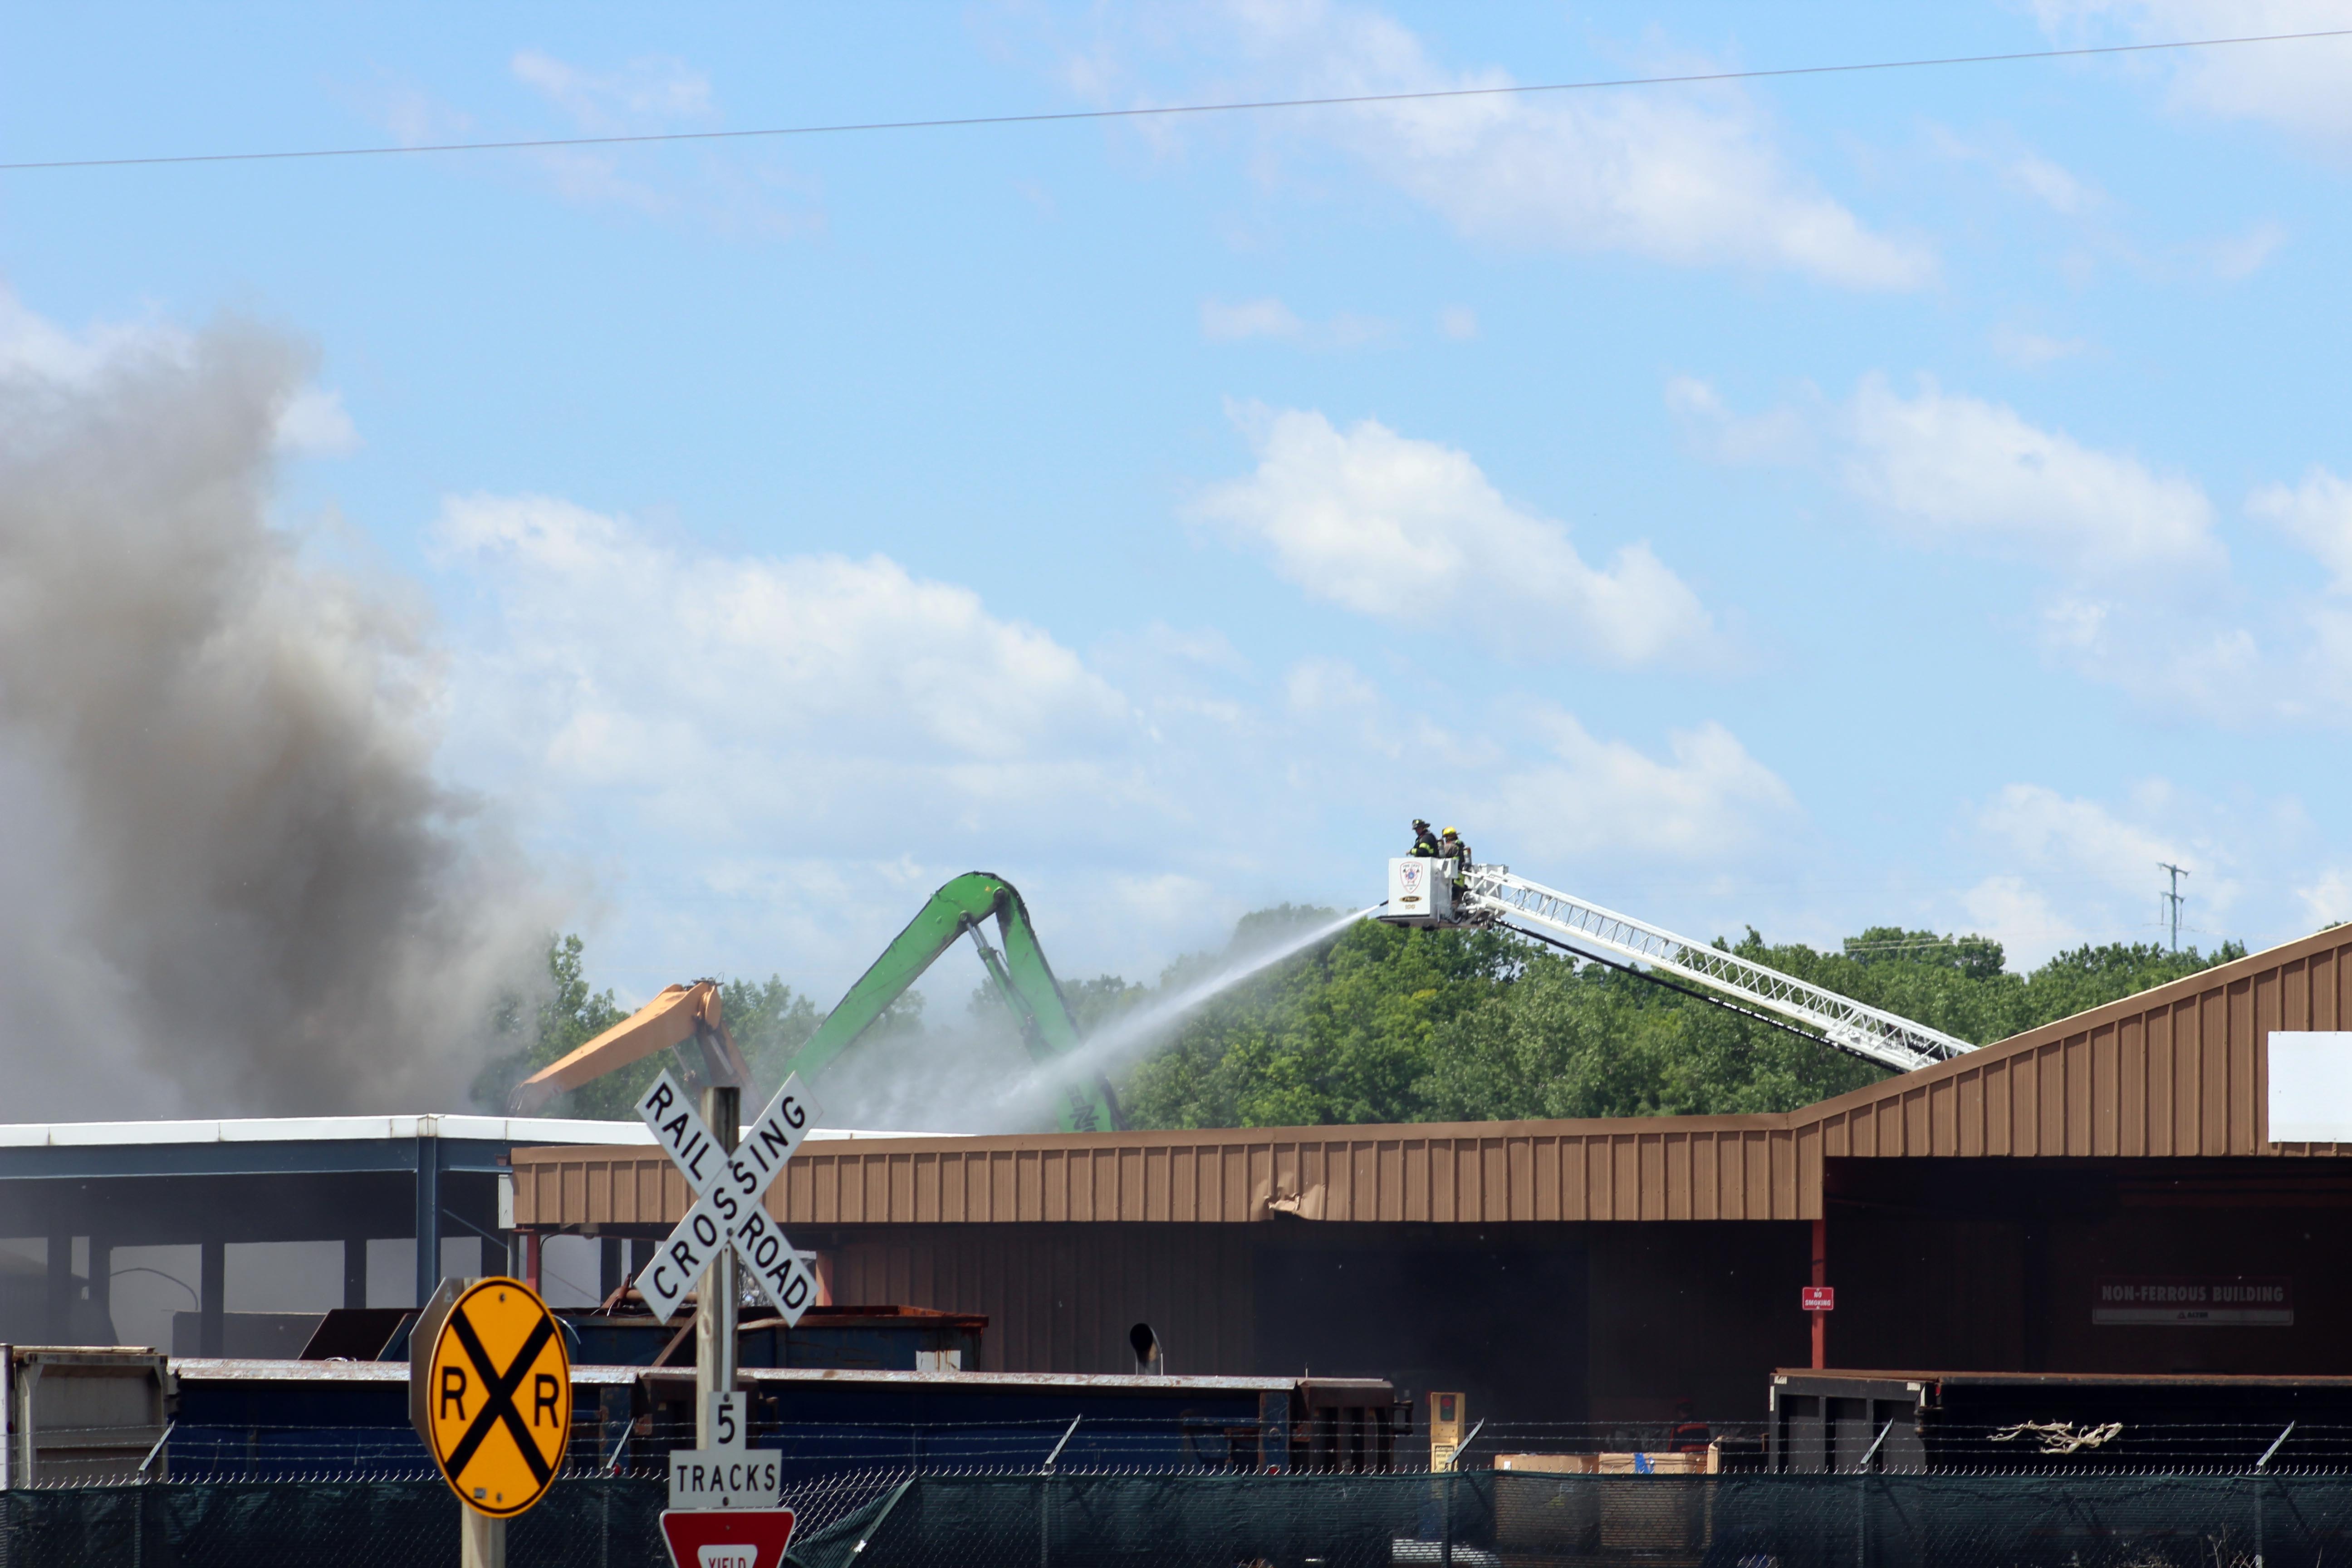 Fire put out at Alter Metal Recycling